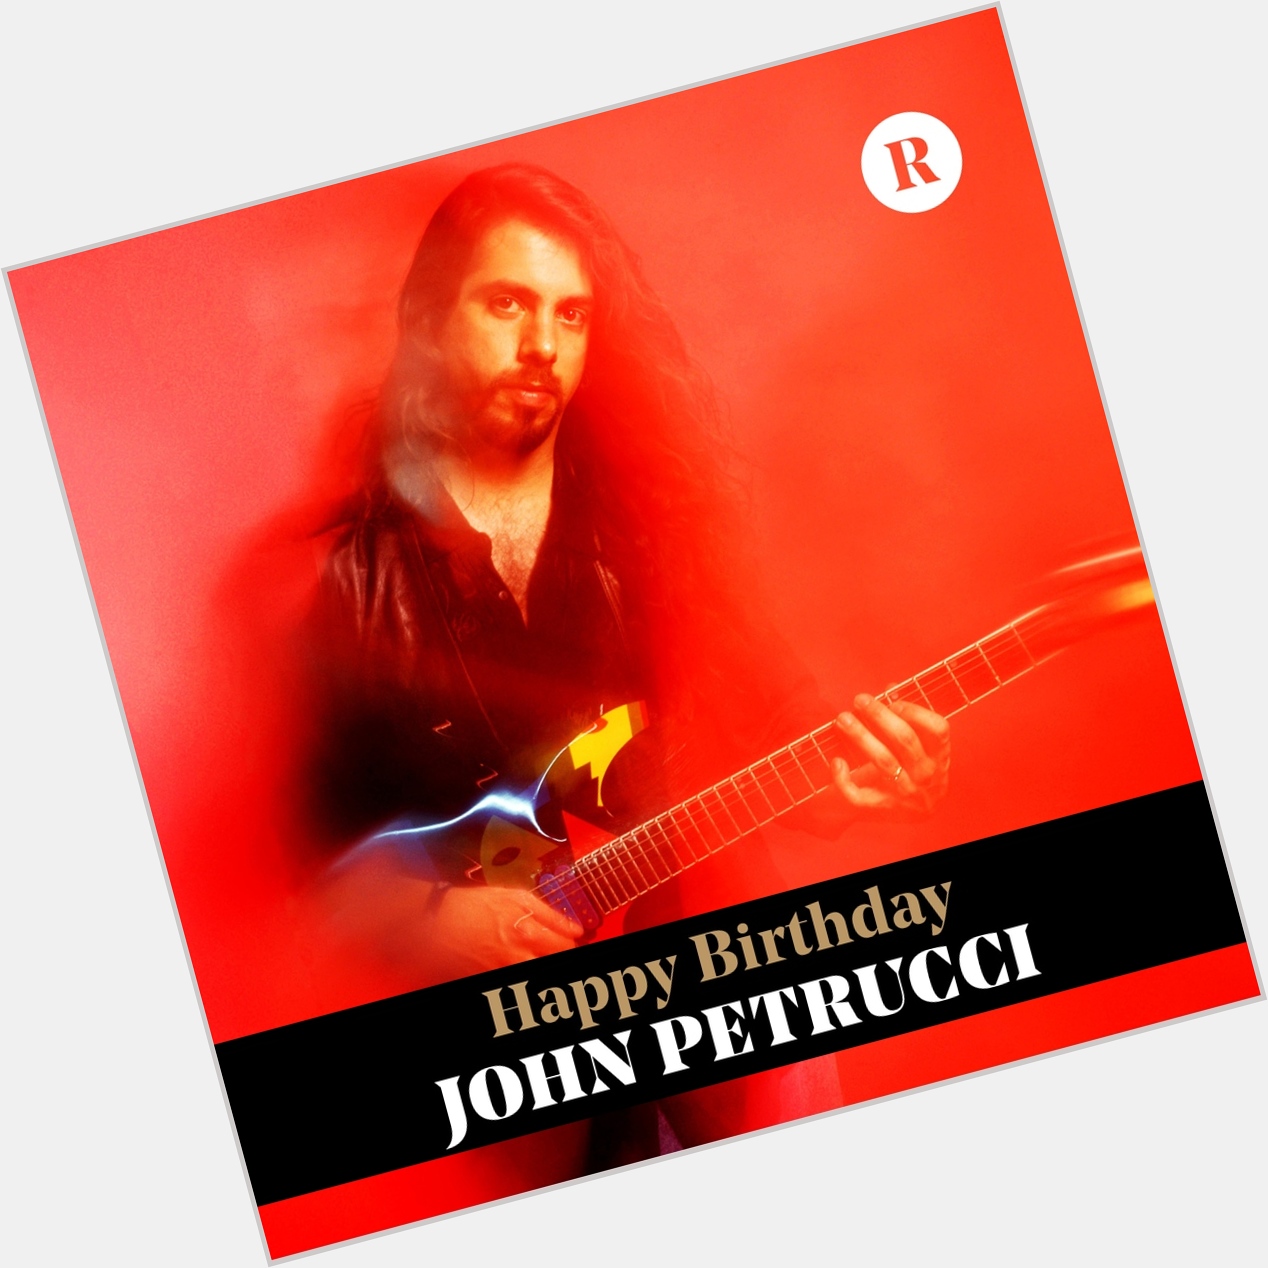  Happy birthday, John Petrucci!

What\s your favorite Dream Theater song? 